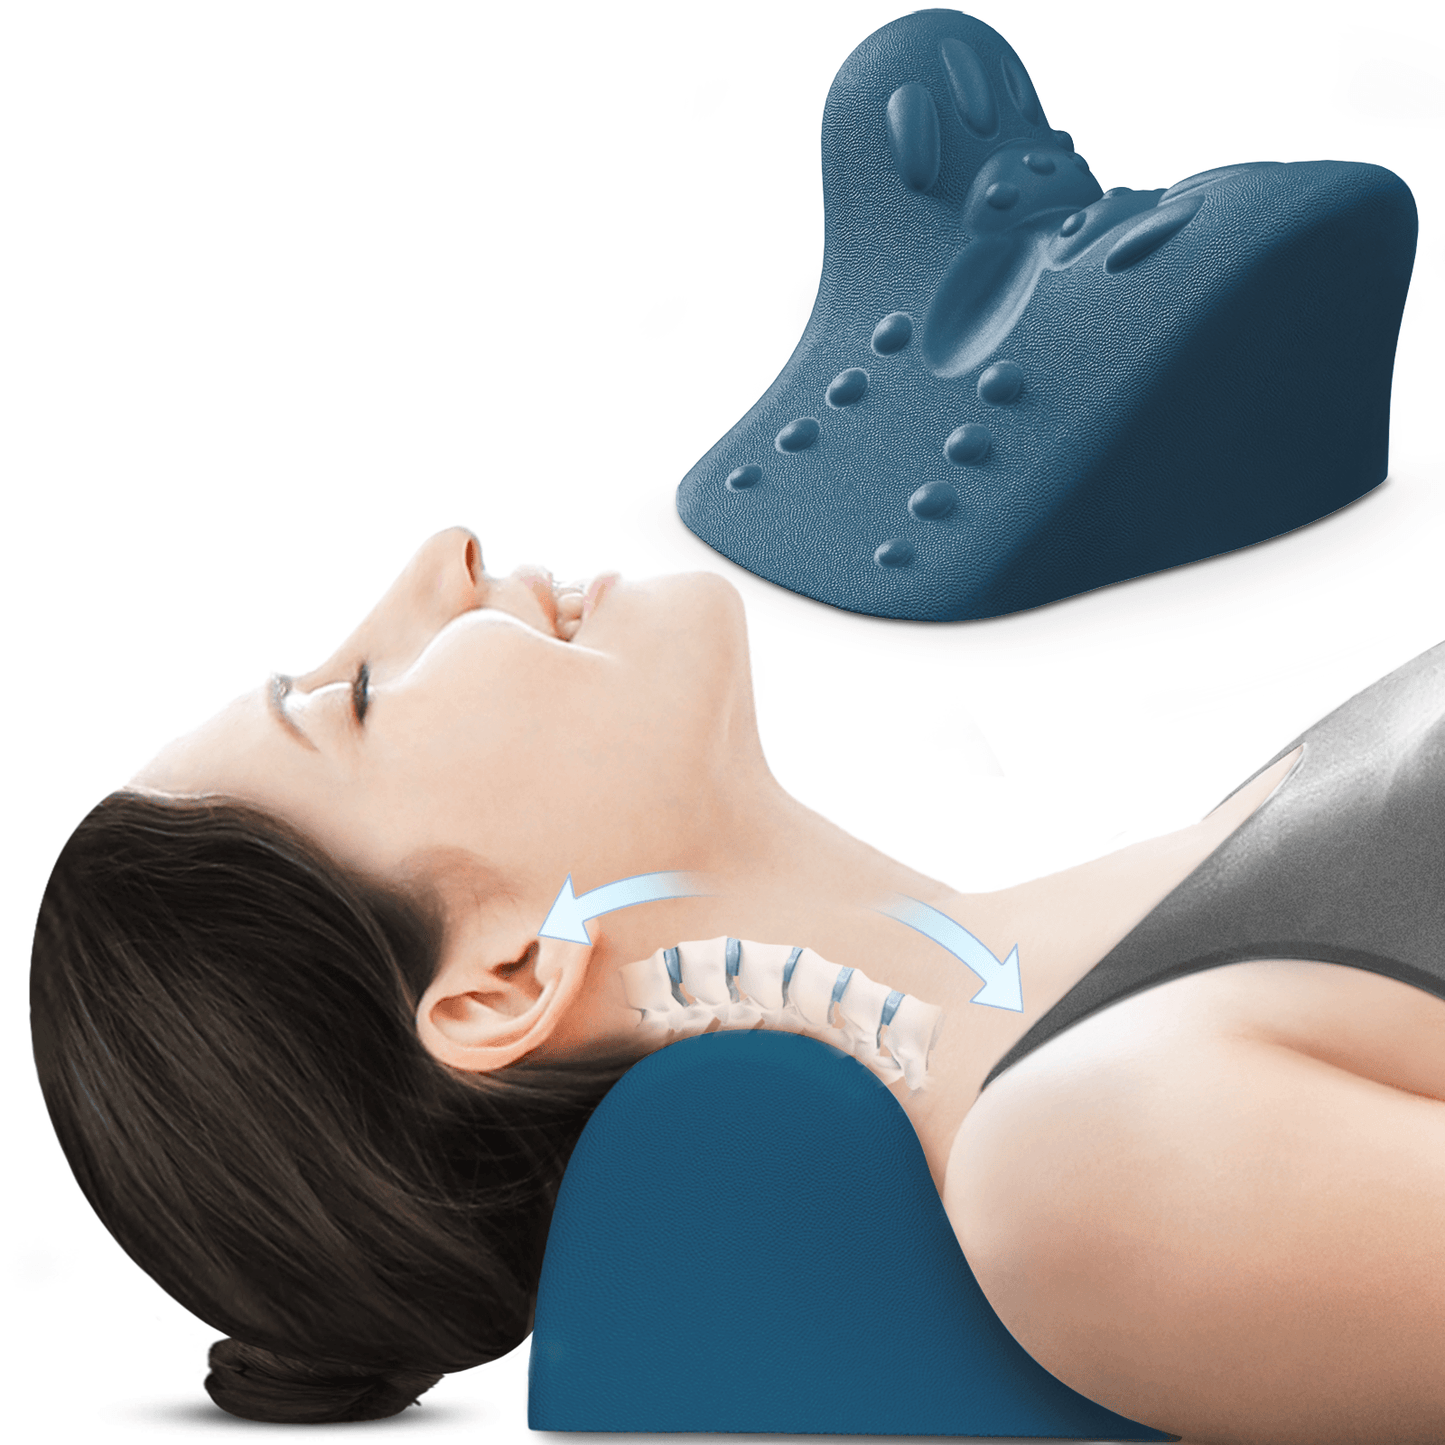 AUVON Neck Stretcher and Relaxer for Neck Pain Relief, Cervical Traction Device Pillow Joint-Developed with Physiotherapists & Orthopedists with TCM Acupoints for TMJ Pain and Cervical Spine Alignment - AUVON